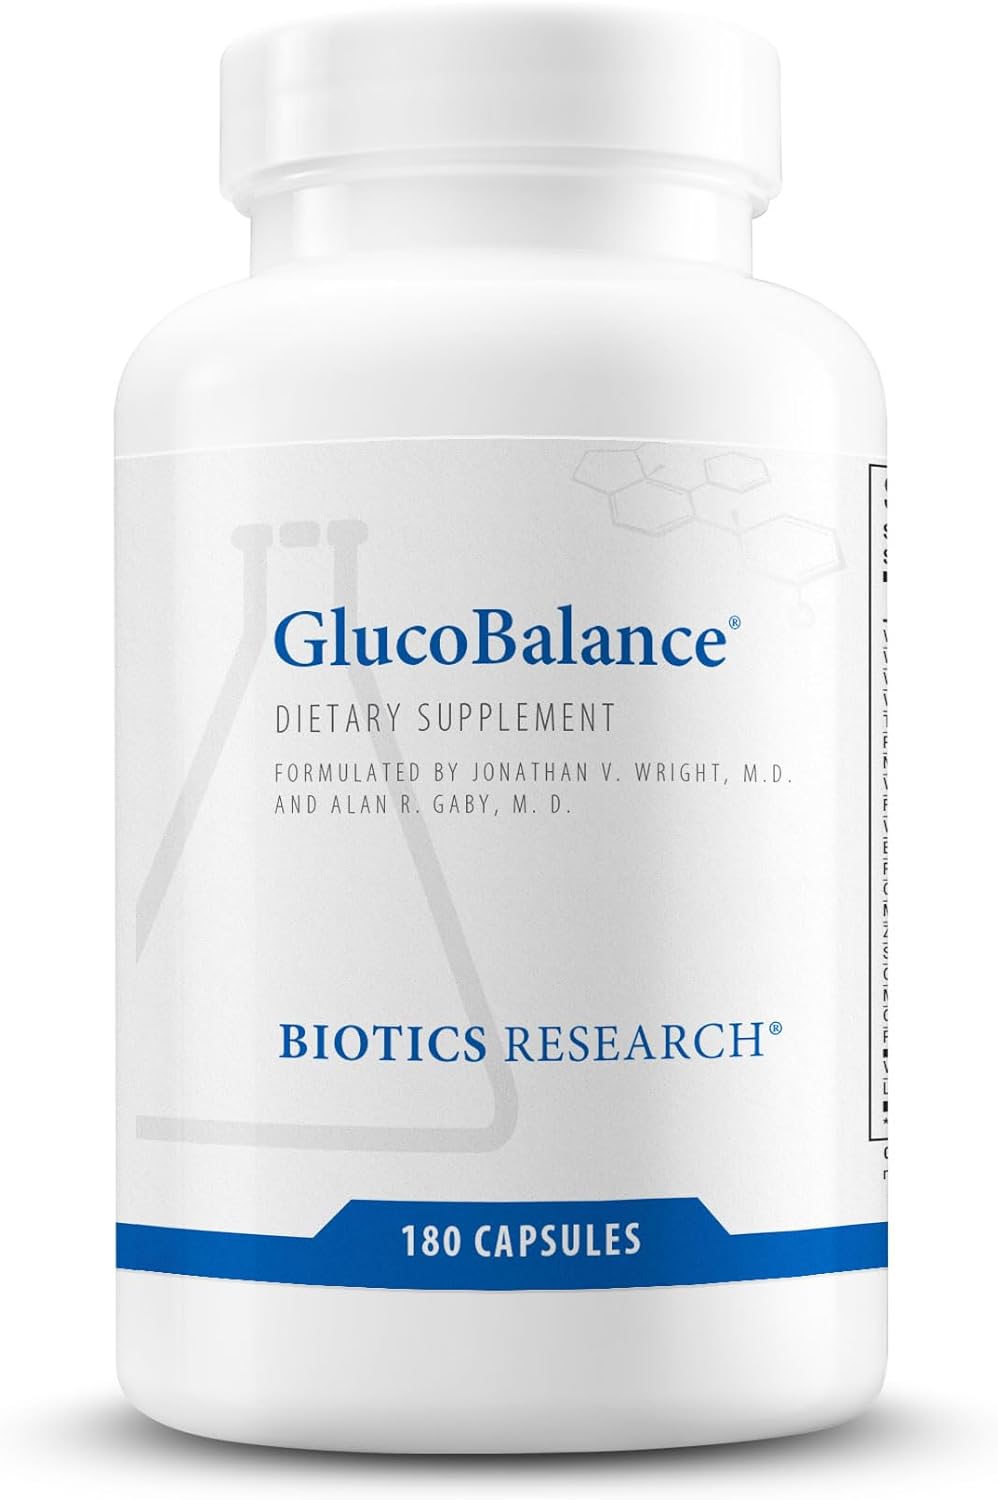 GlucoBalance® A temporary, highly recommended, alternative  to True Balance